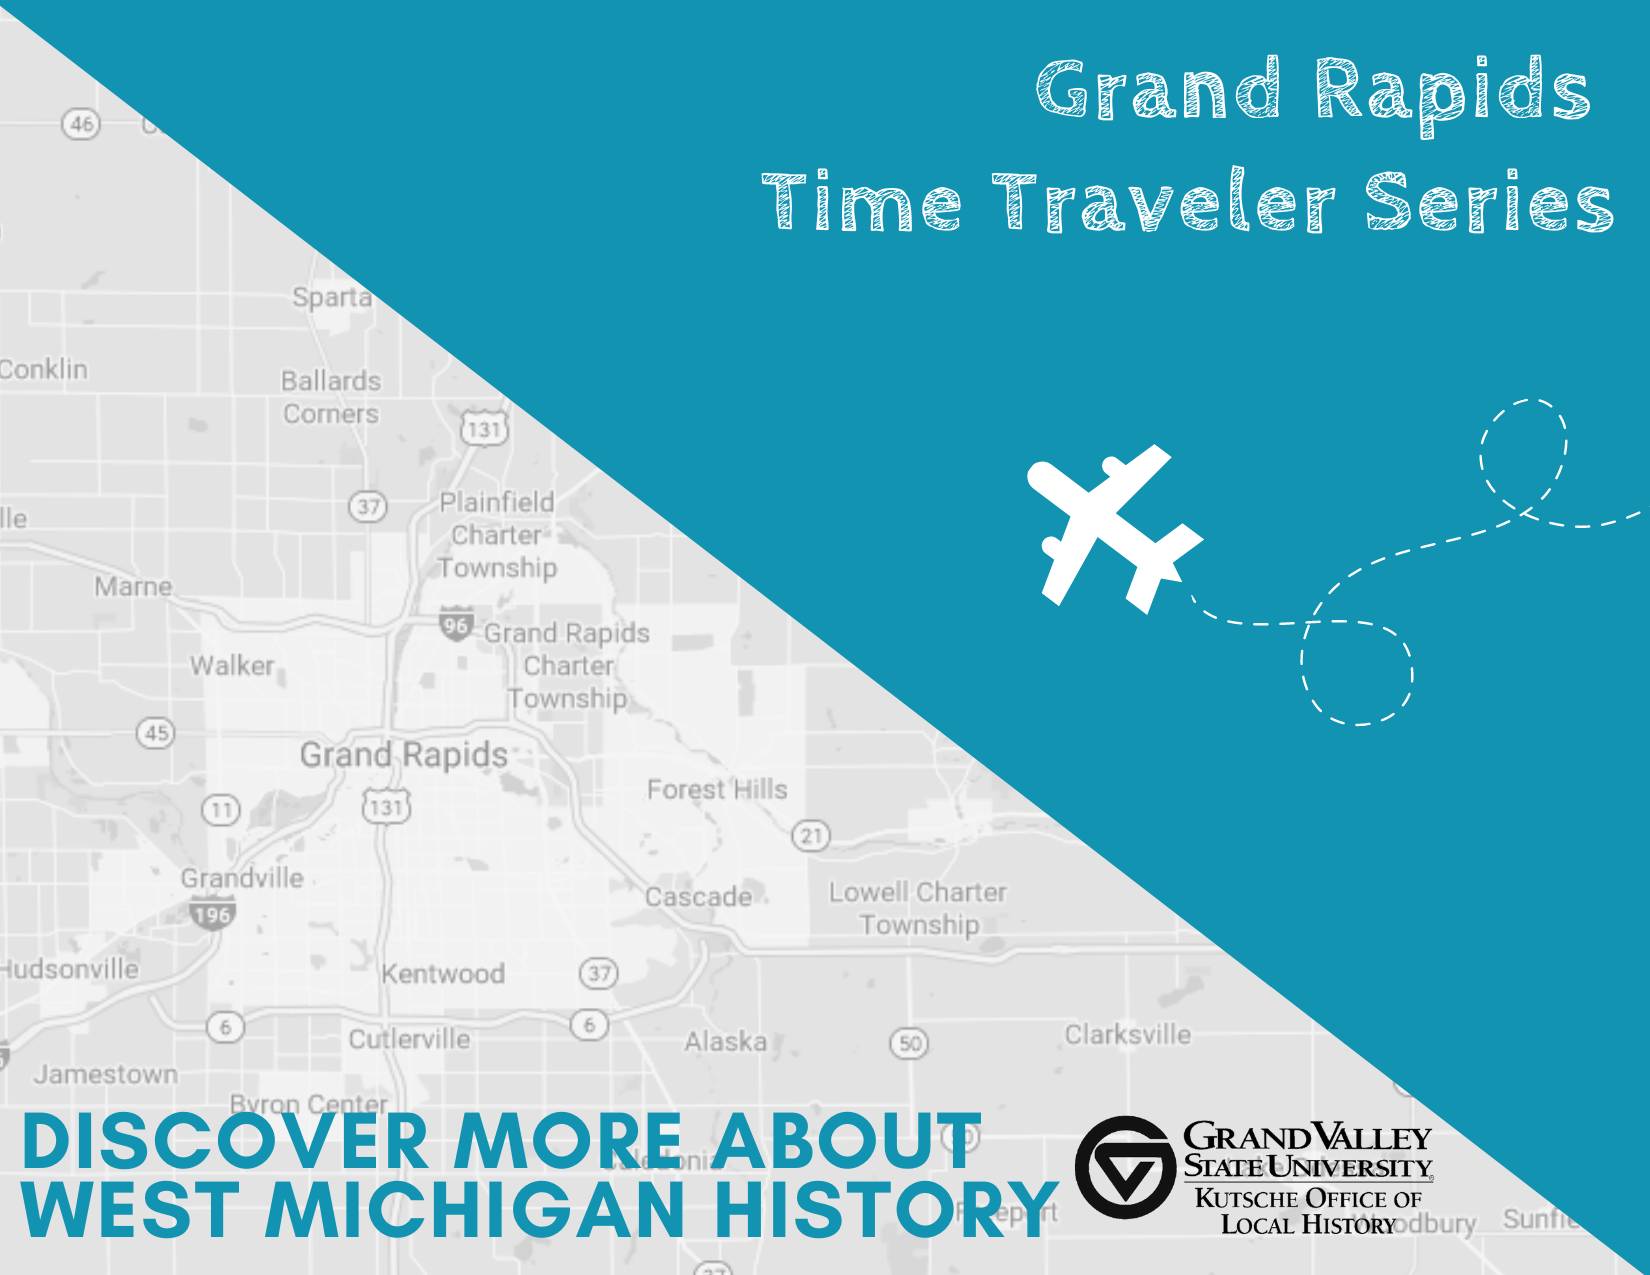 Image of a transparent map of Grand Rapids from Google maps and text on a teal background that says "Grand Rapids Time Traveler Series." The tag line reads "Discover more about West Michigan History."